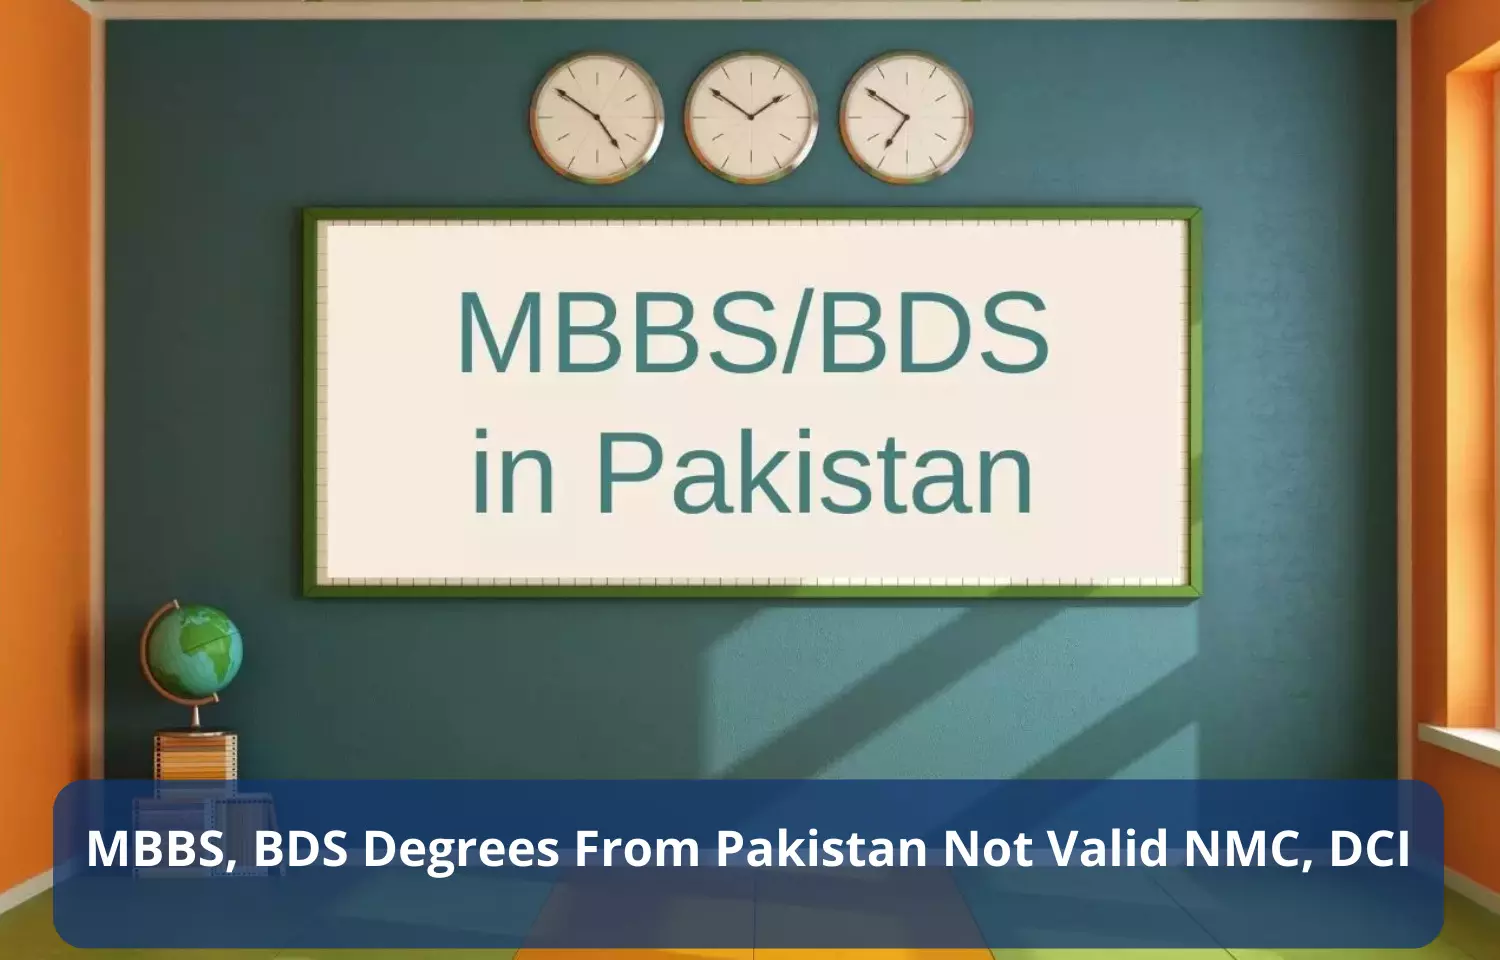 NMC declares MBBS, BDS degrees from Pakistan invalid